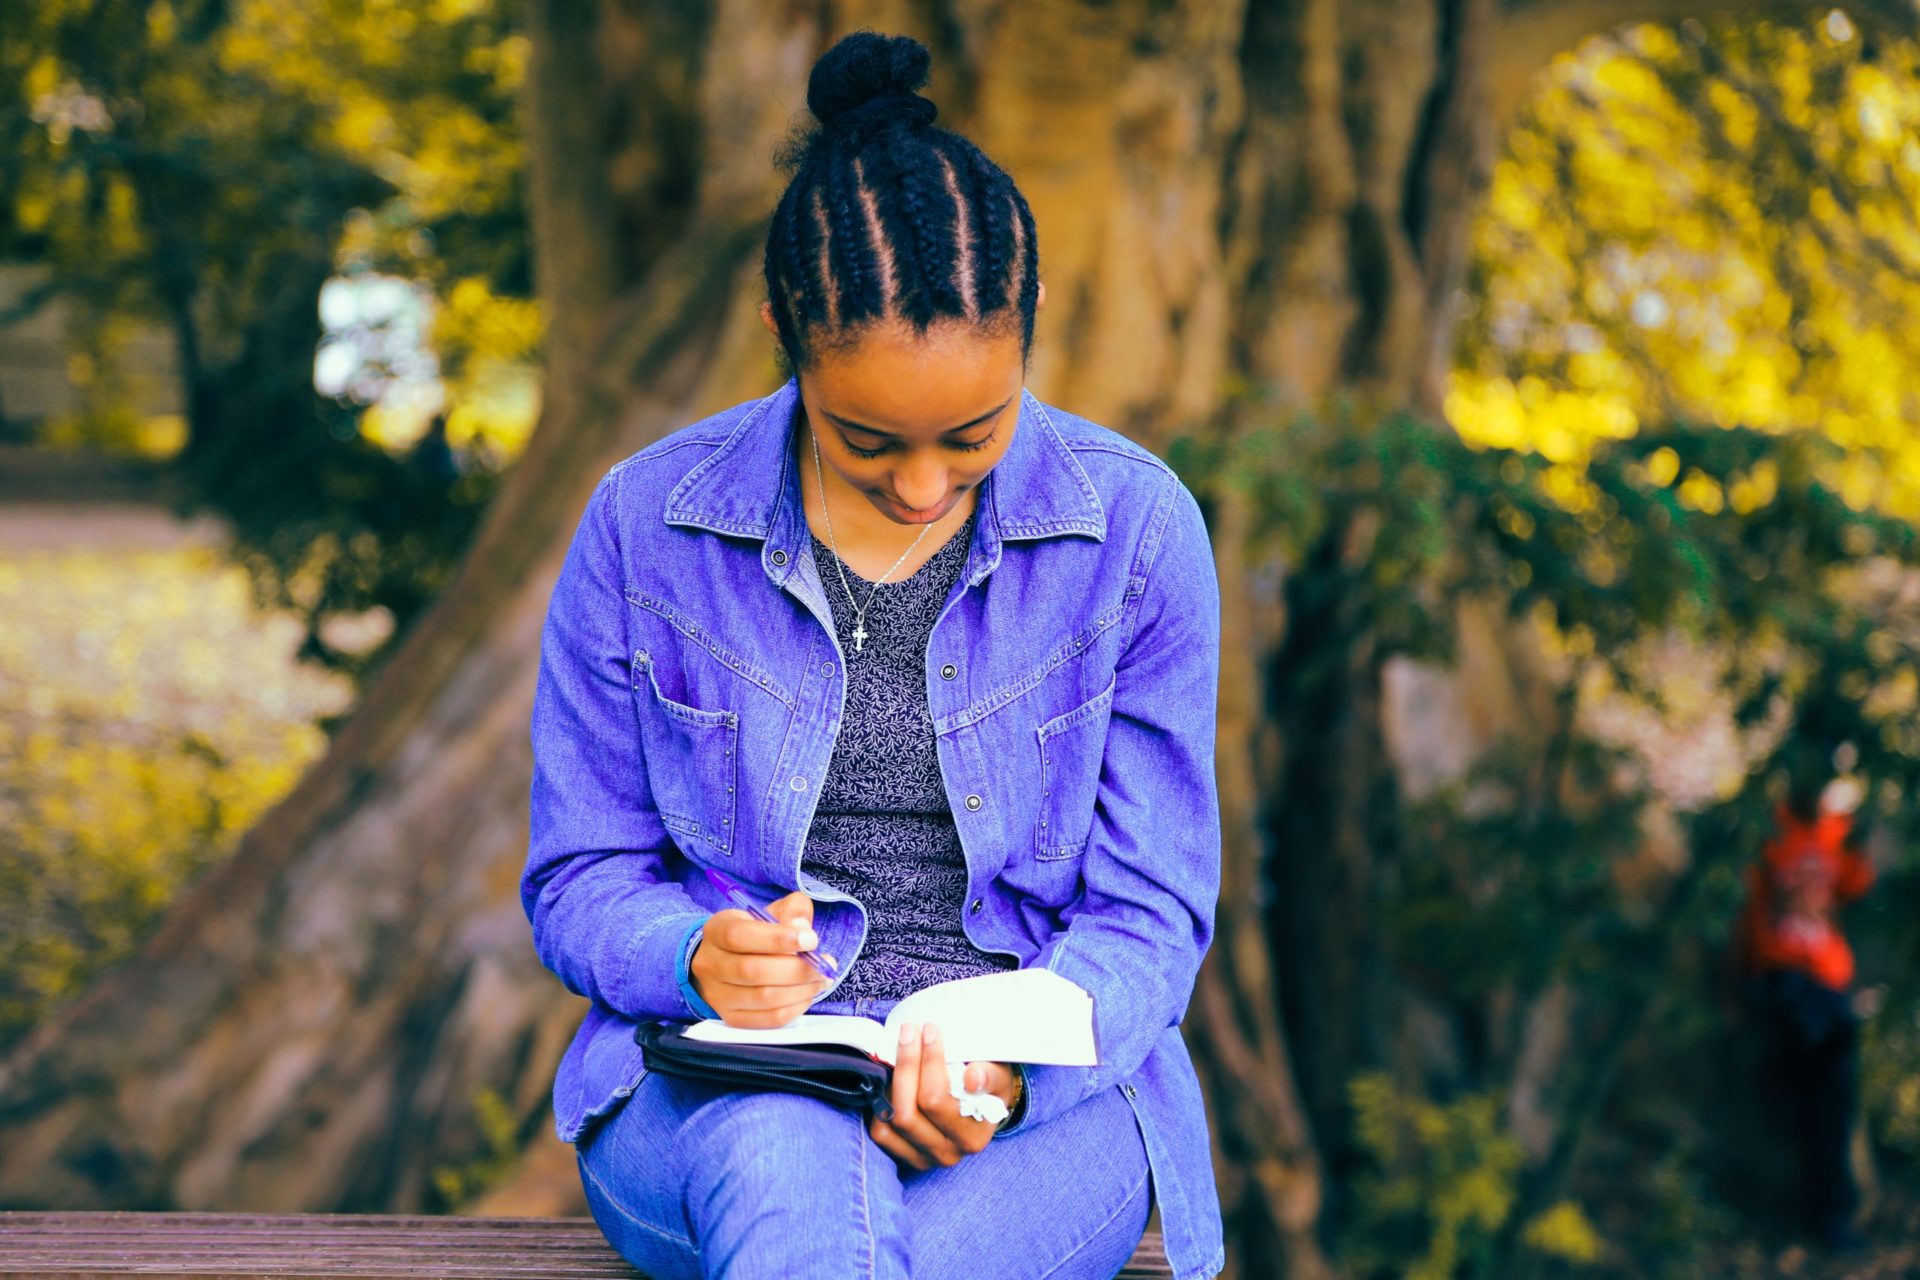 A young women with medium dark skin sits in front of a tree on a bench. She has braided hair that leads to a pony tail, a matching periwinkle jacket and pant and a gray-blue jacket. She is holding a purple pen with a book open on her lap.